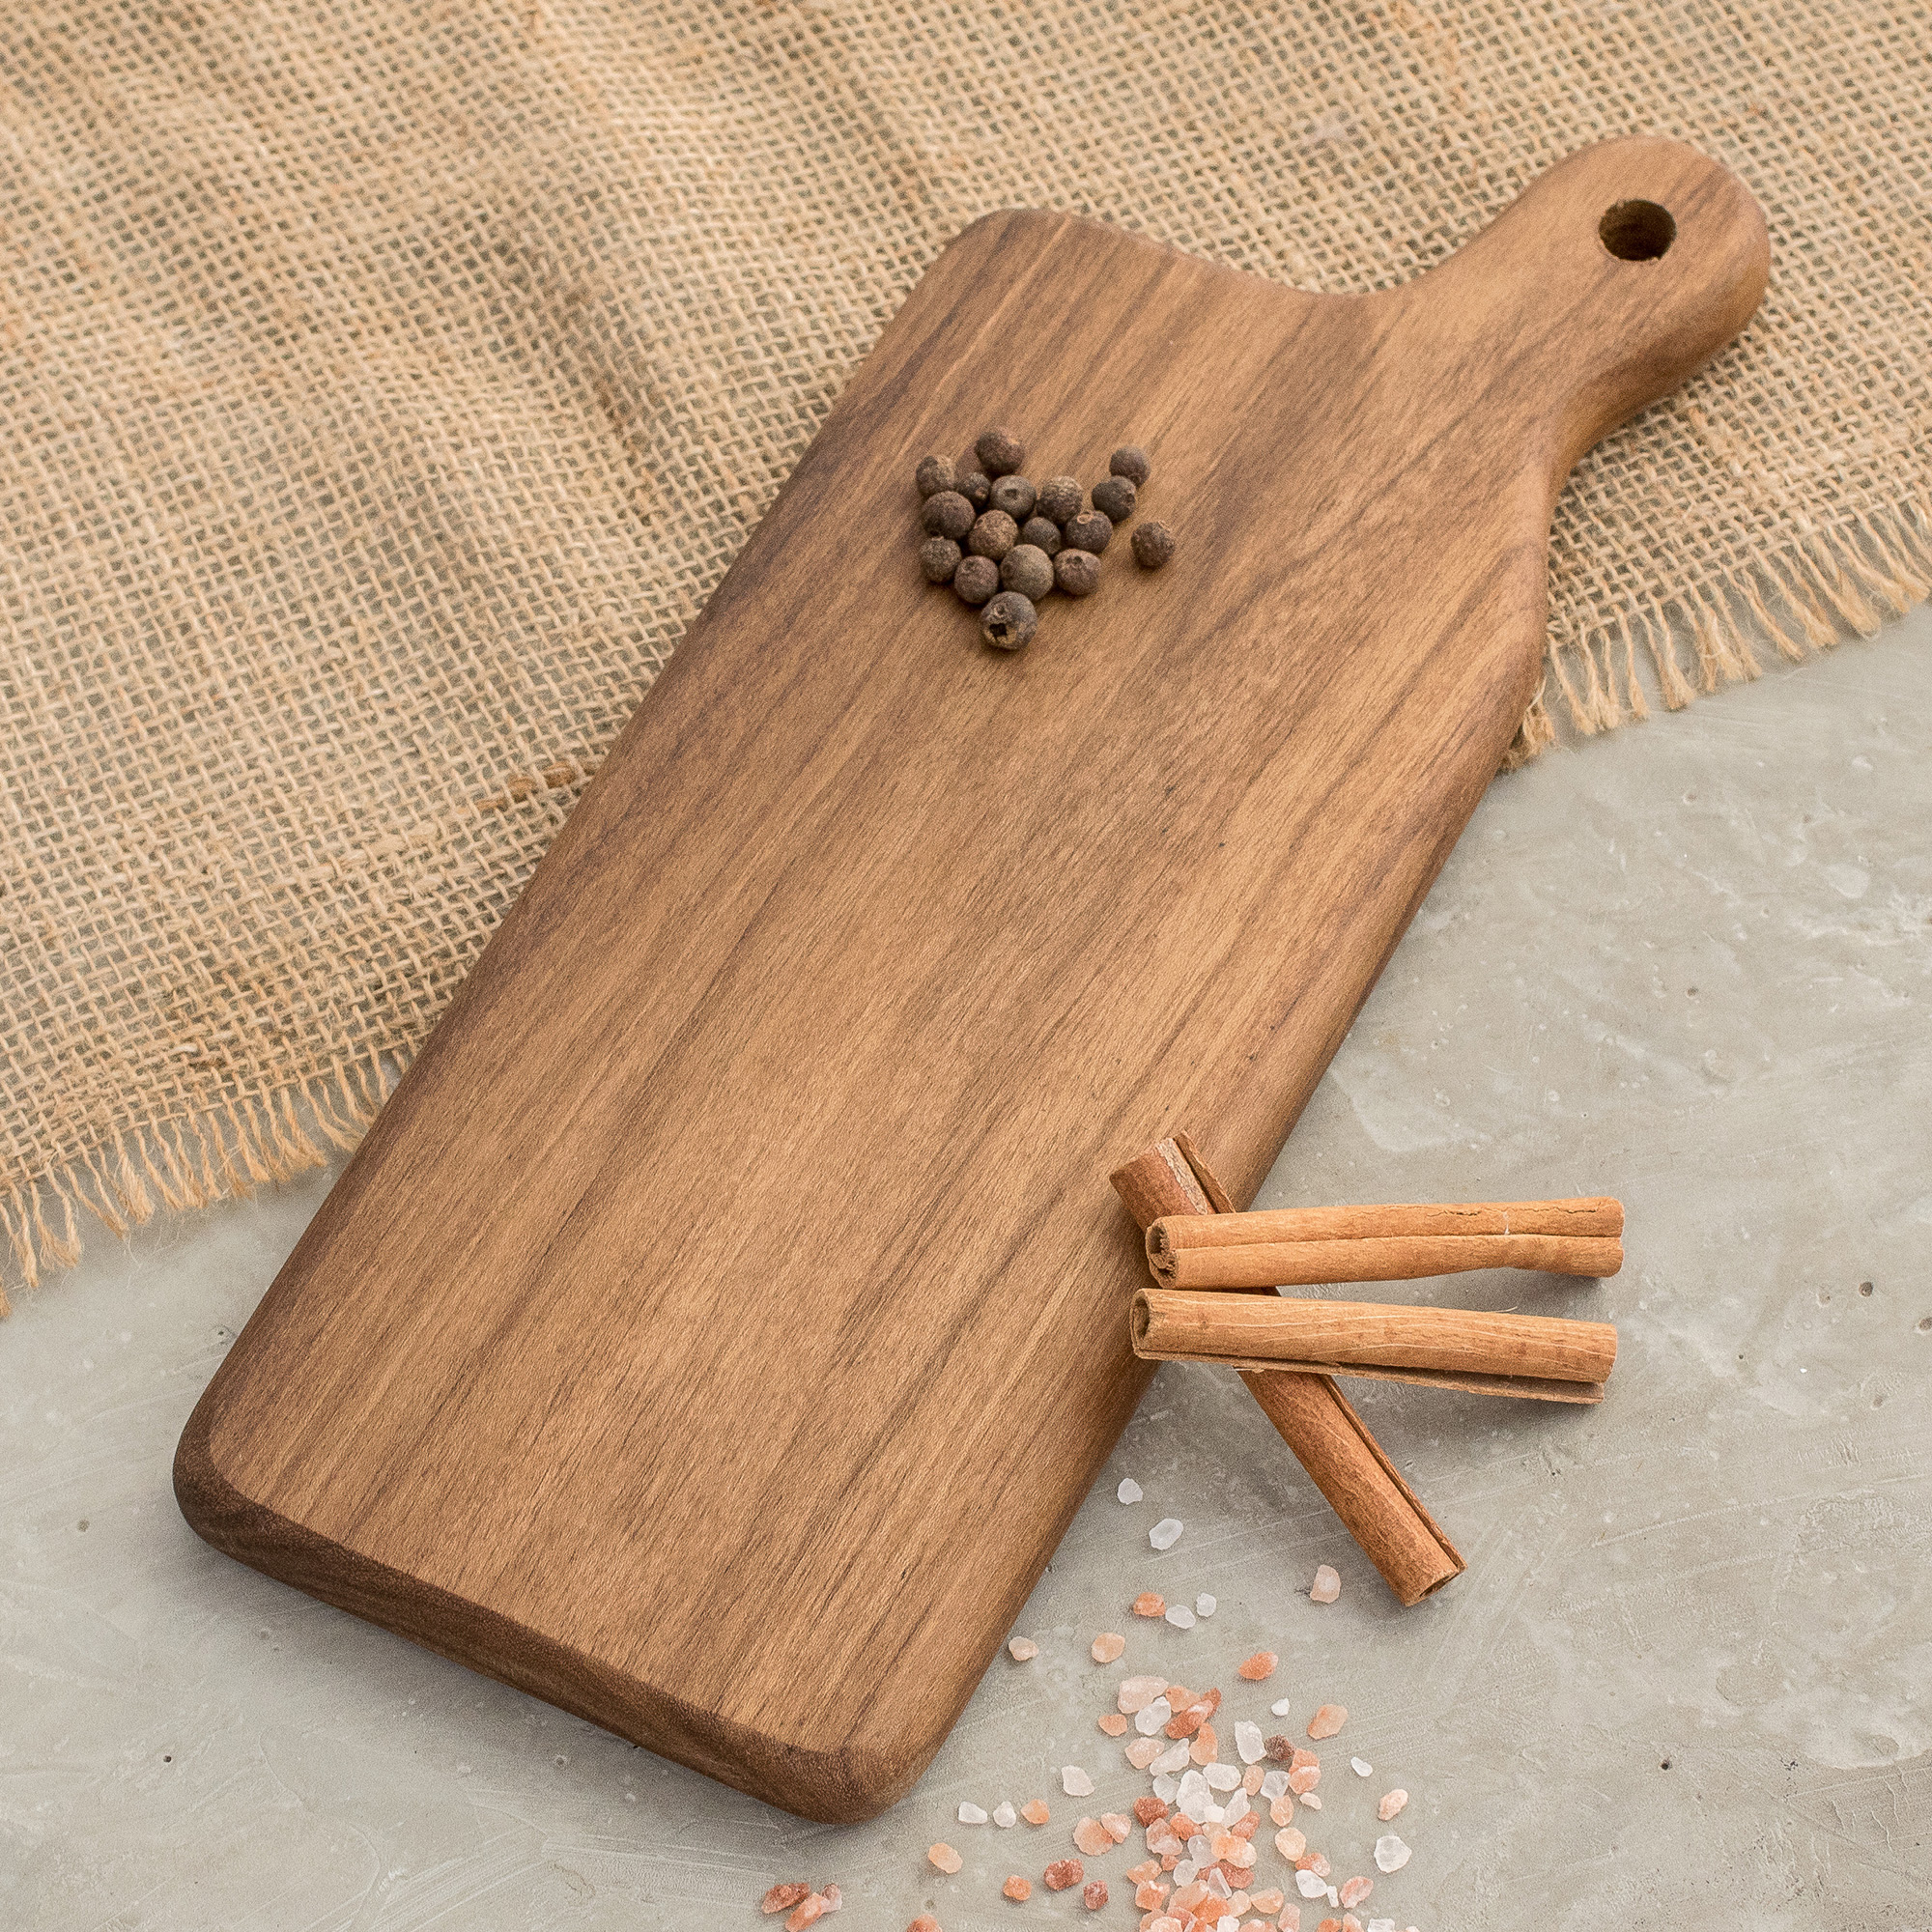 Handcrafted Small Bay Laurel Wood Cutting Board in Brown - Laurel